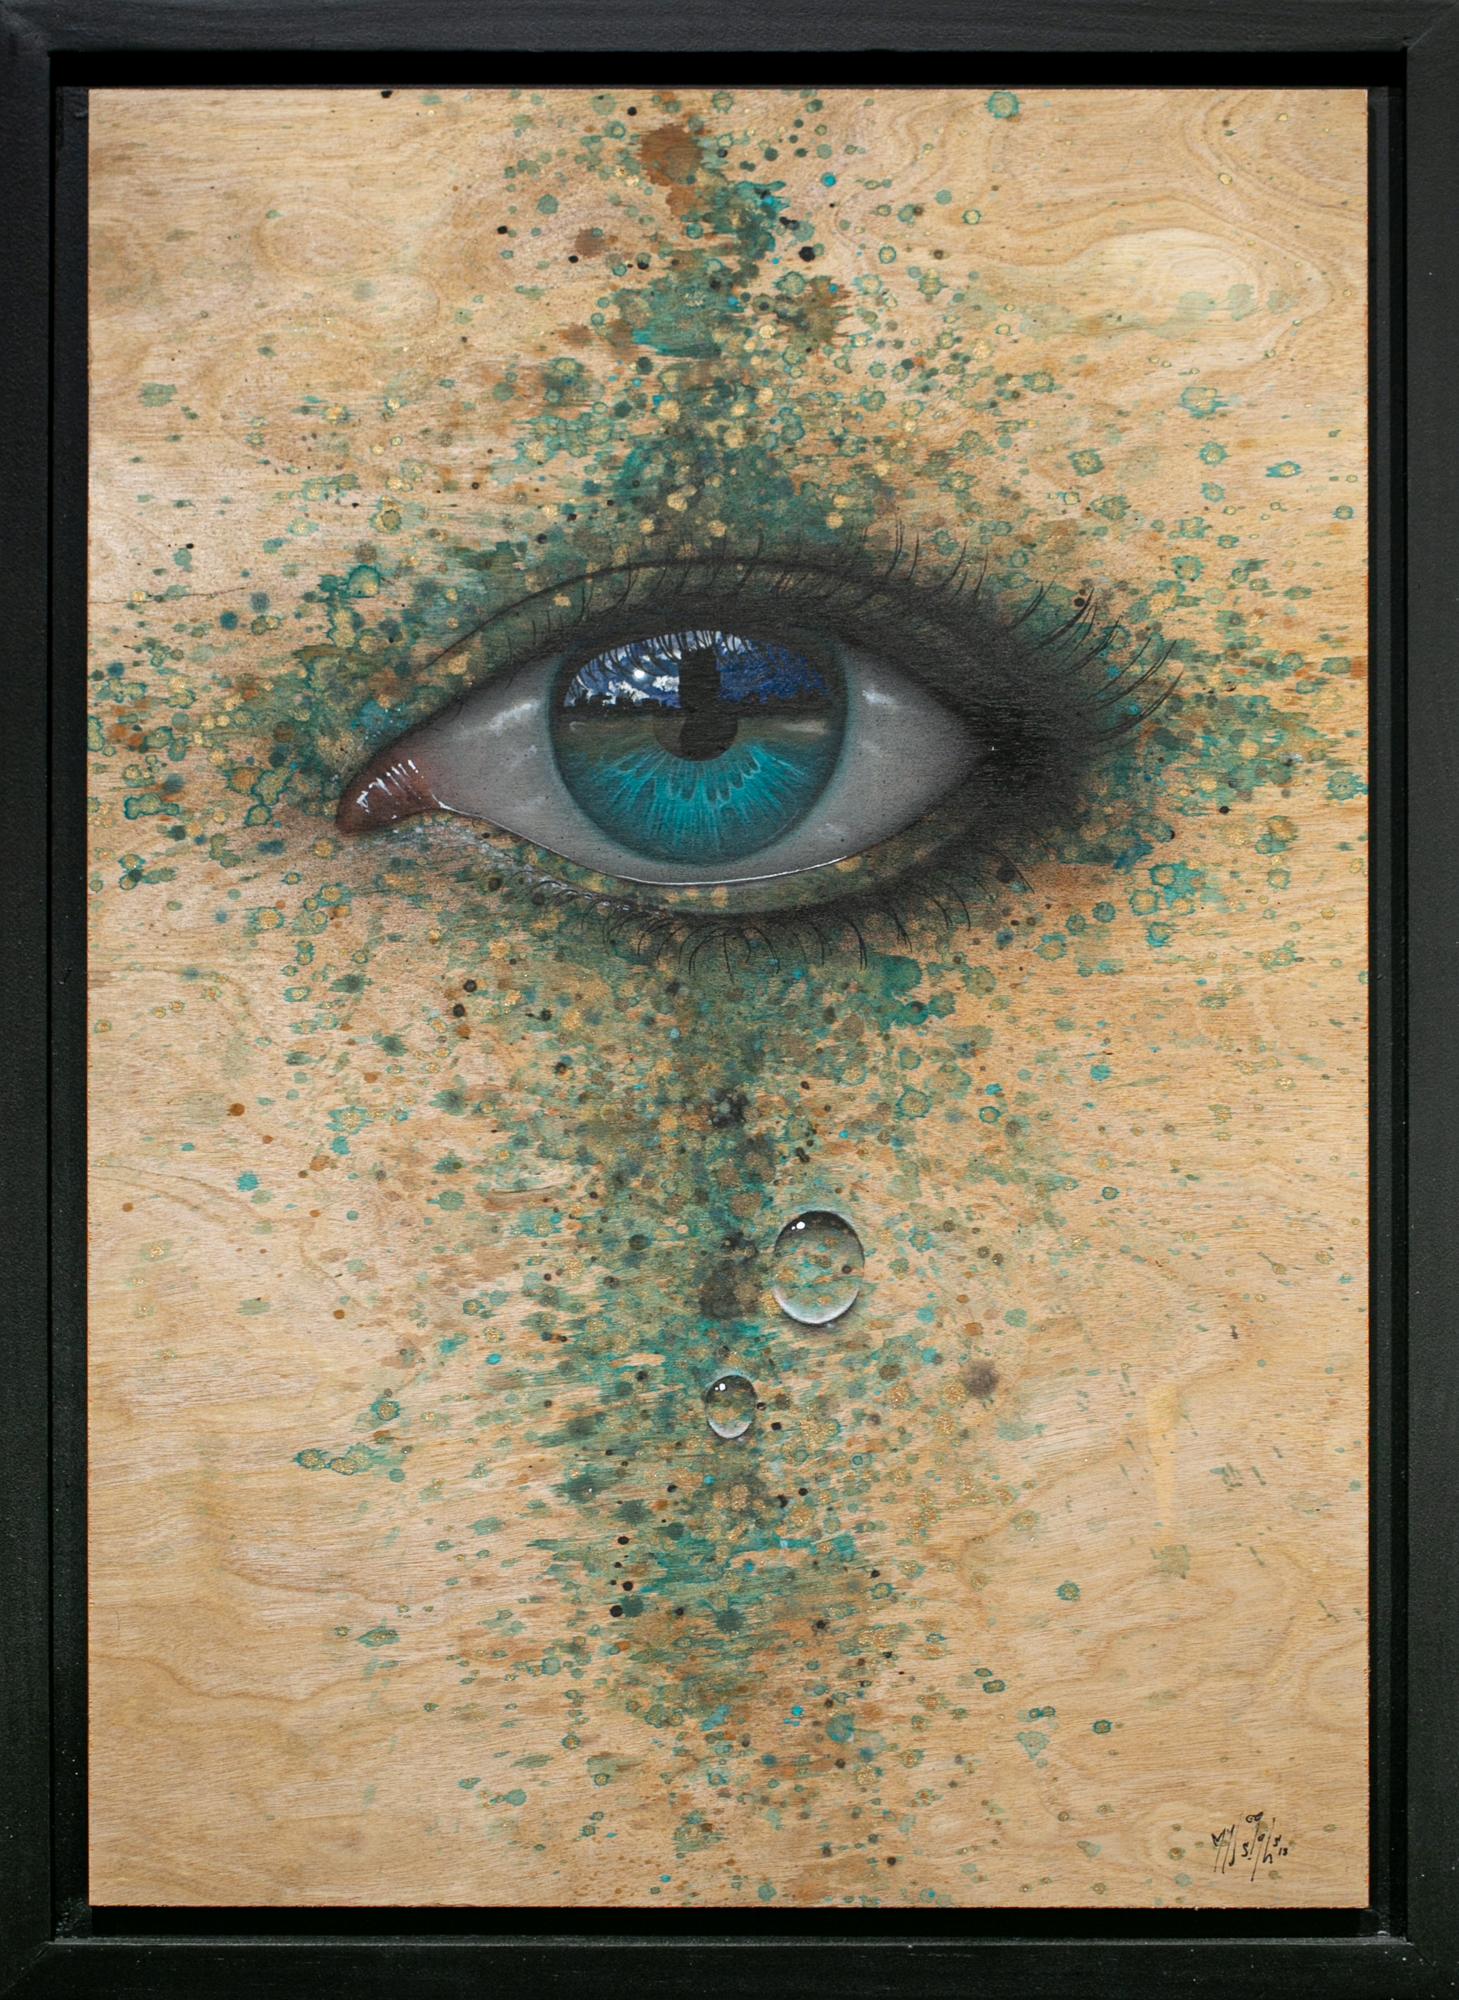 "So, this is it", Eye Painting, Realistic, Realism, Acrylic, Spray Paint on Wood